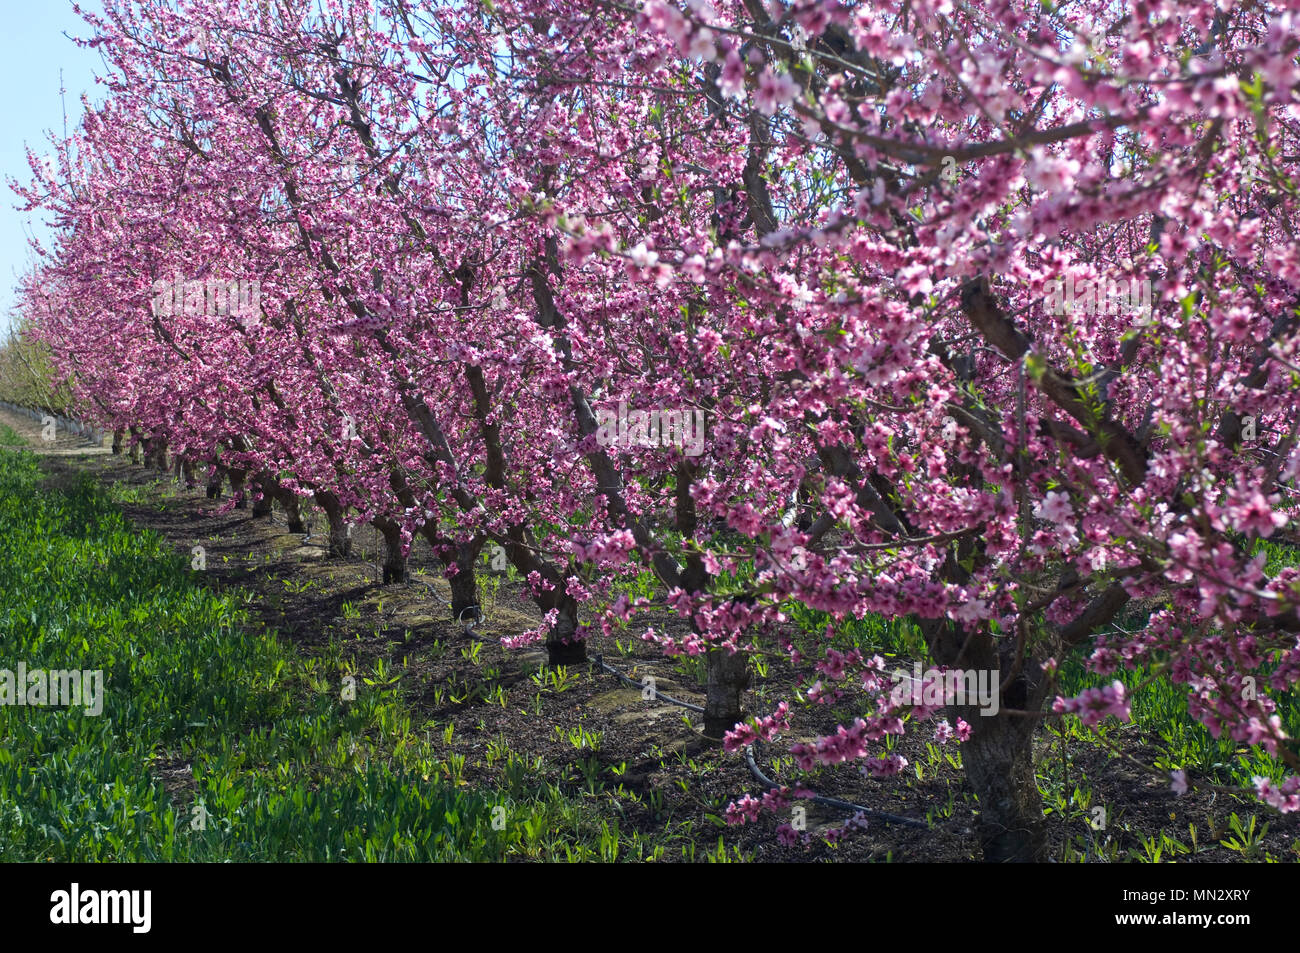 Almond trees covered in blooming pink flowers, grow in rows in the California Valley. Stock Photo